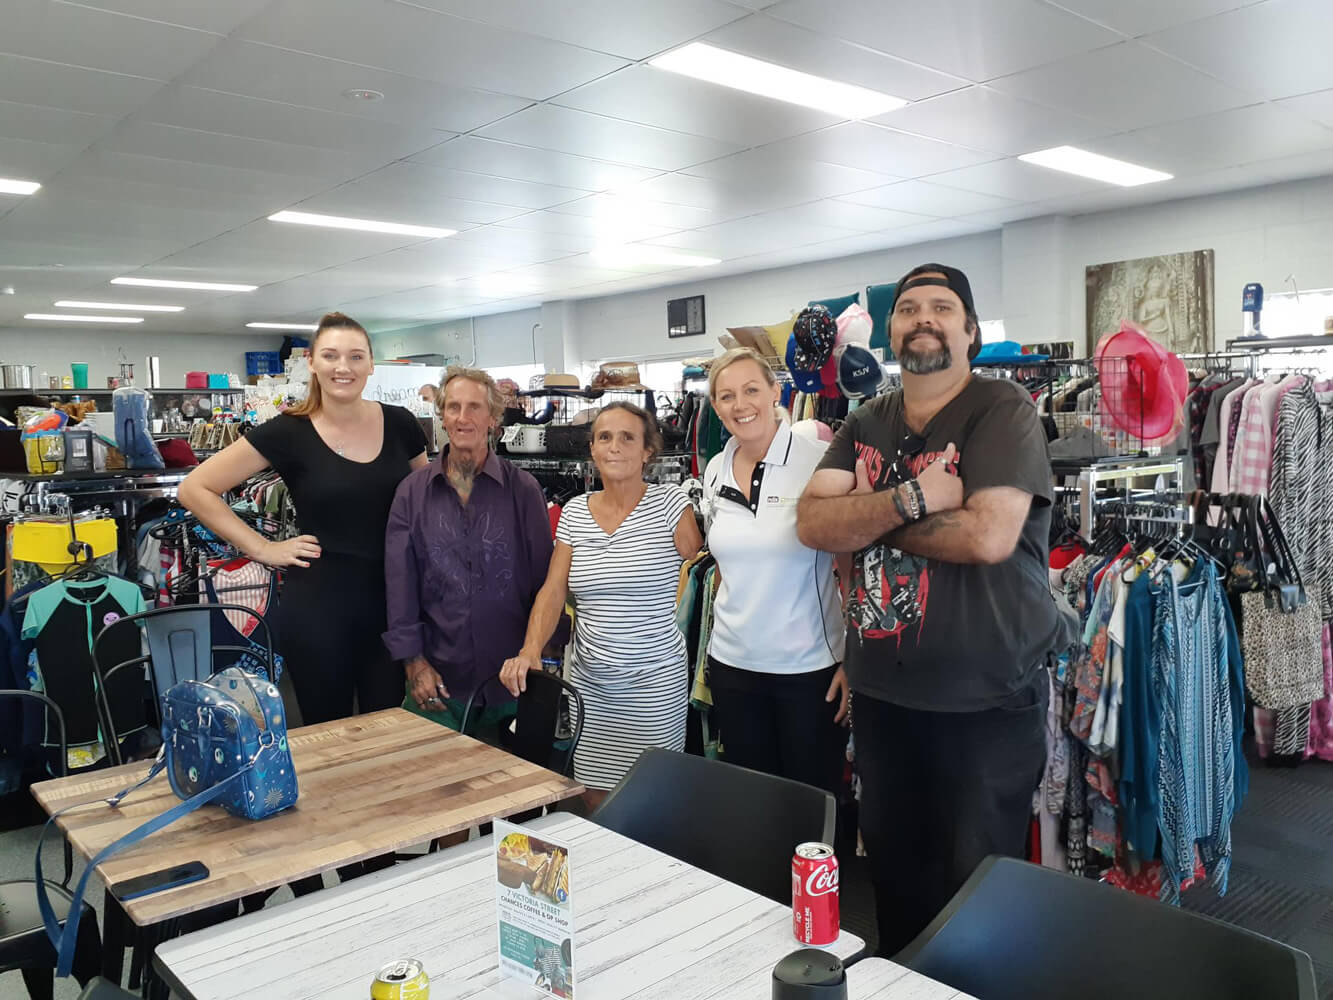 5 people in an op shop. They are smiling and looking toward the camera.